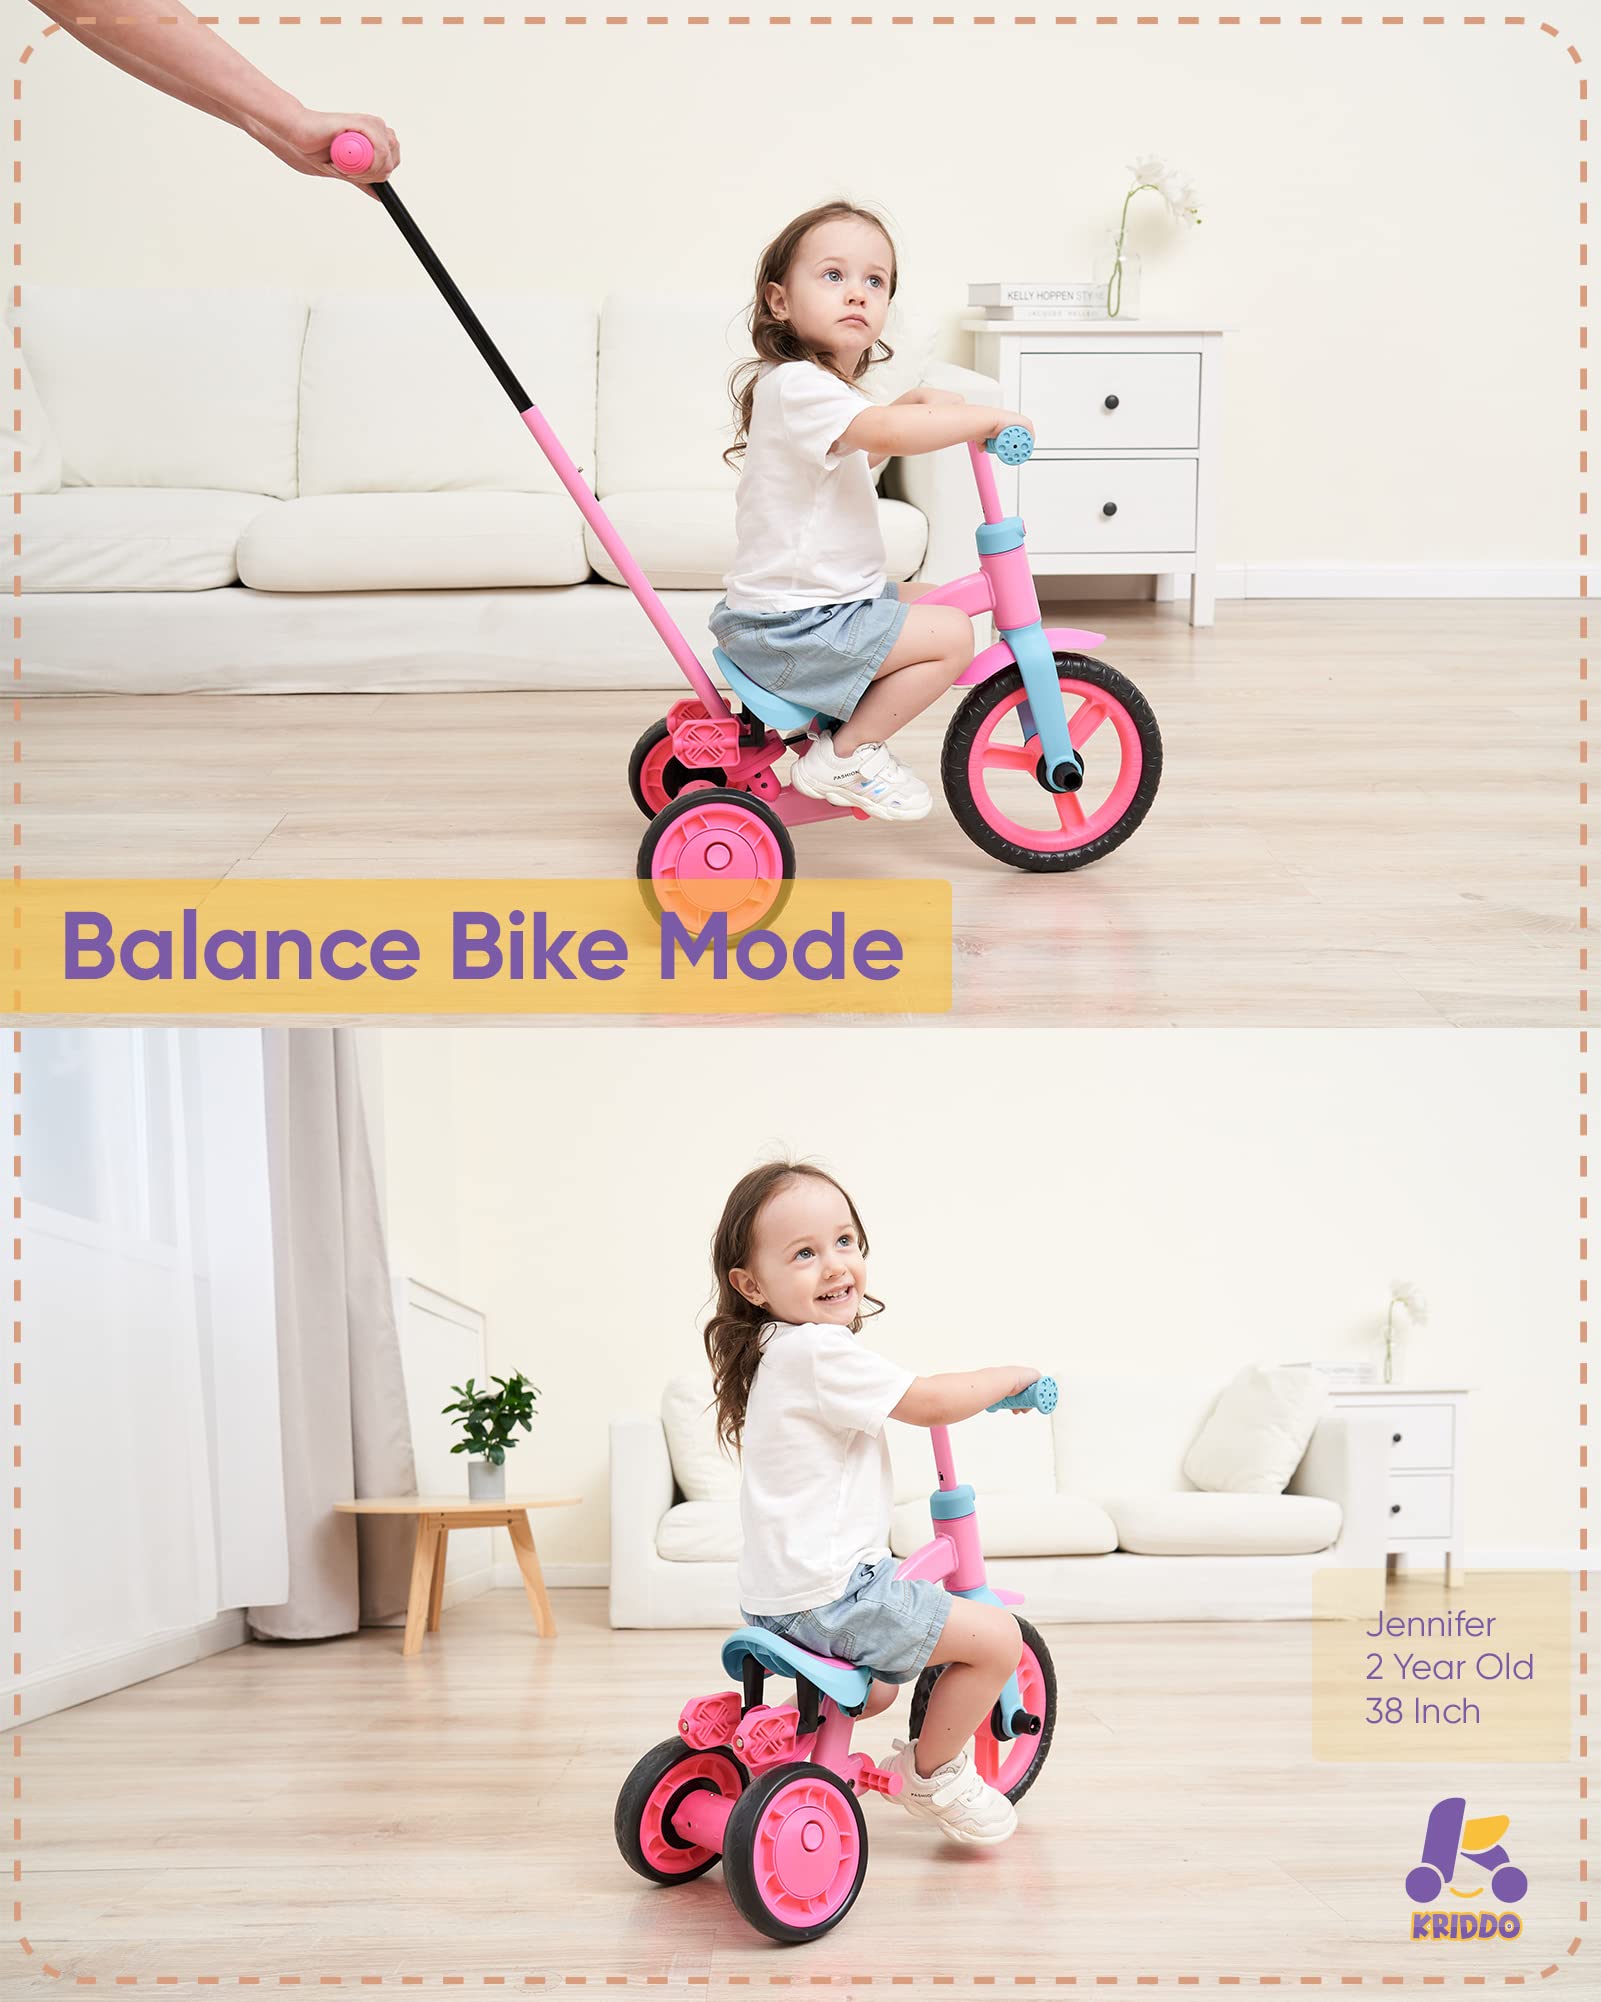 KRIDDO 4-in-1 Kids Tricycle for 1.5 to 3 Yea Old with Parent Steering Push Handle, 12 Inch Front Wheel Trike, Toddler Balance Bike for Boys Girls 18 Month to 3 Years, Adjustable Height, Pink